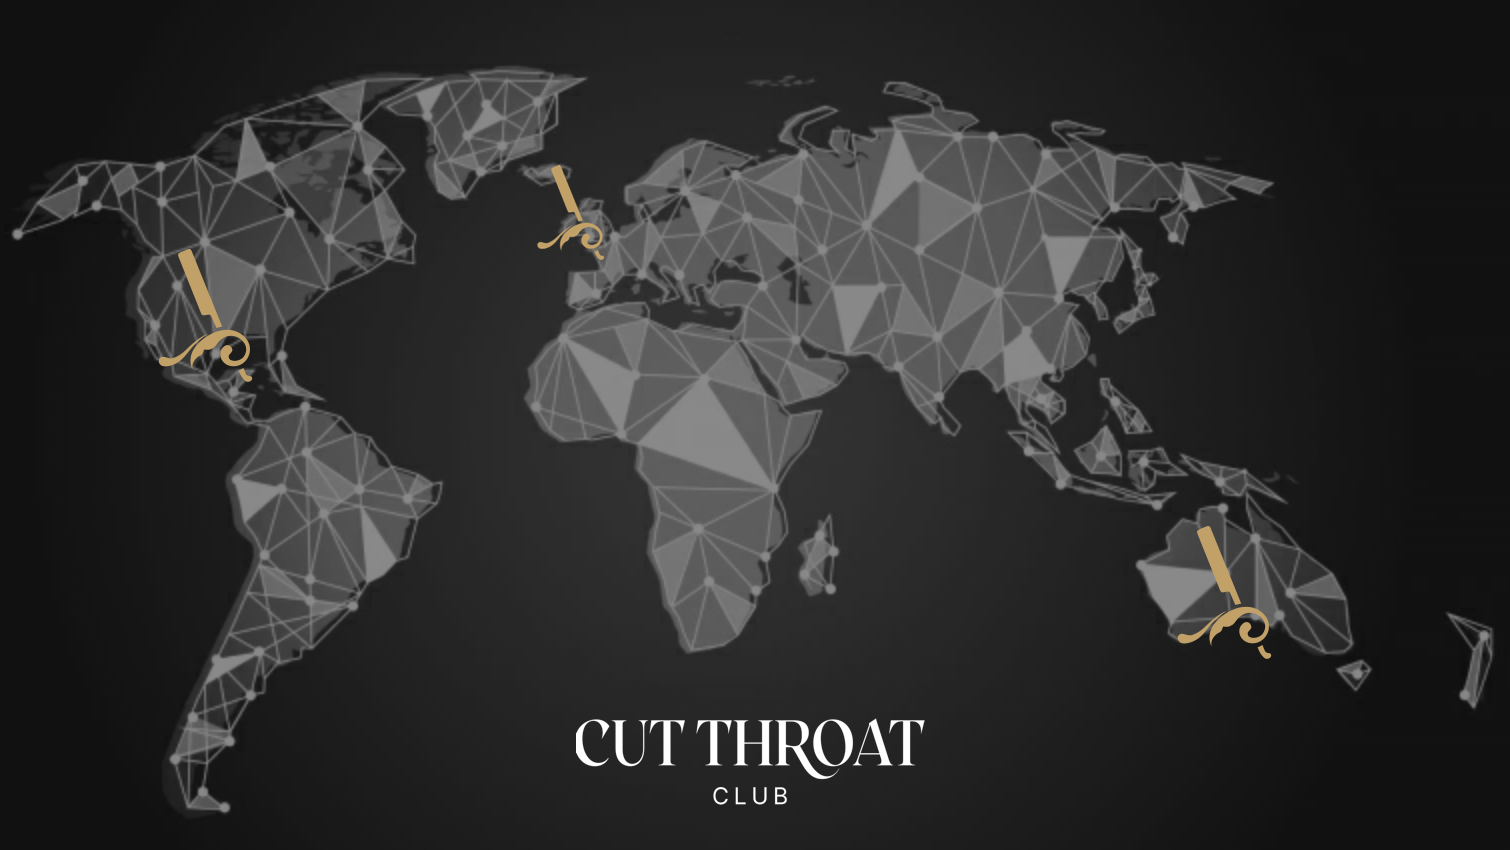 Cut Throat Club launches in the US, as TYSR Ltd announces Stateside expansion